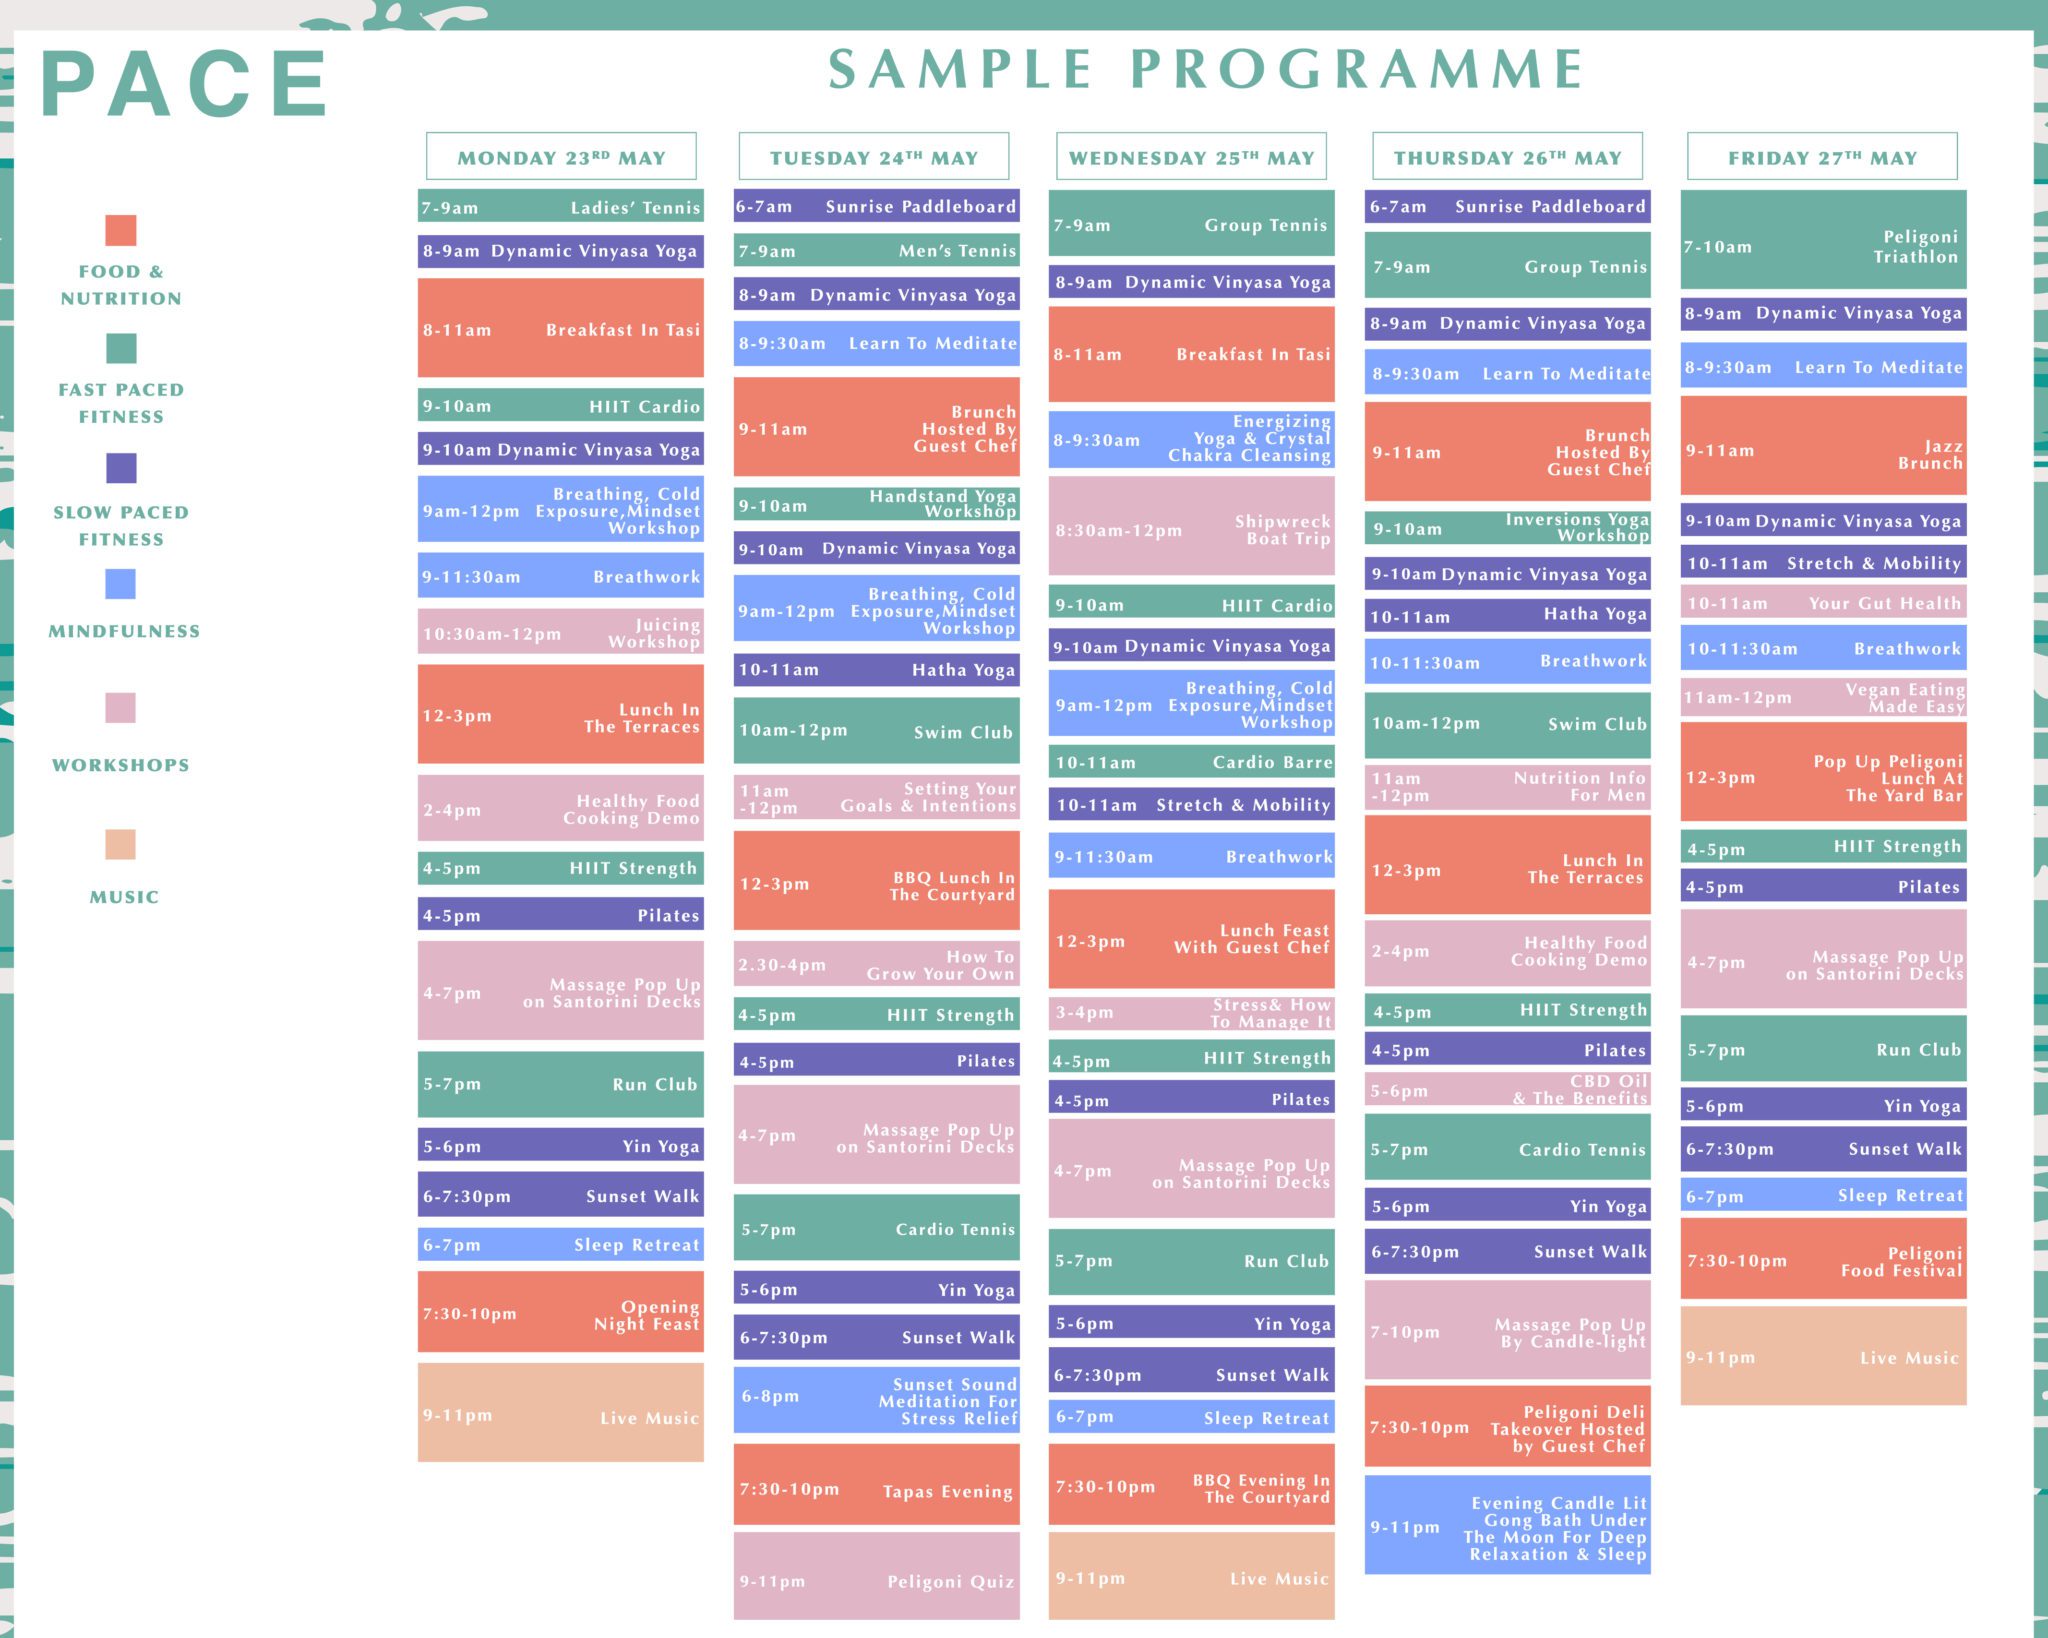 PACE 2022 Programme